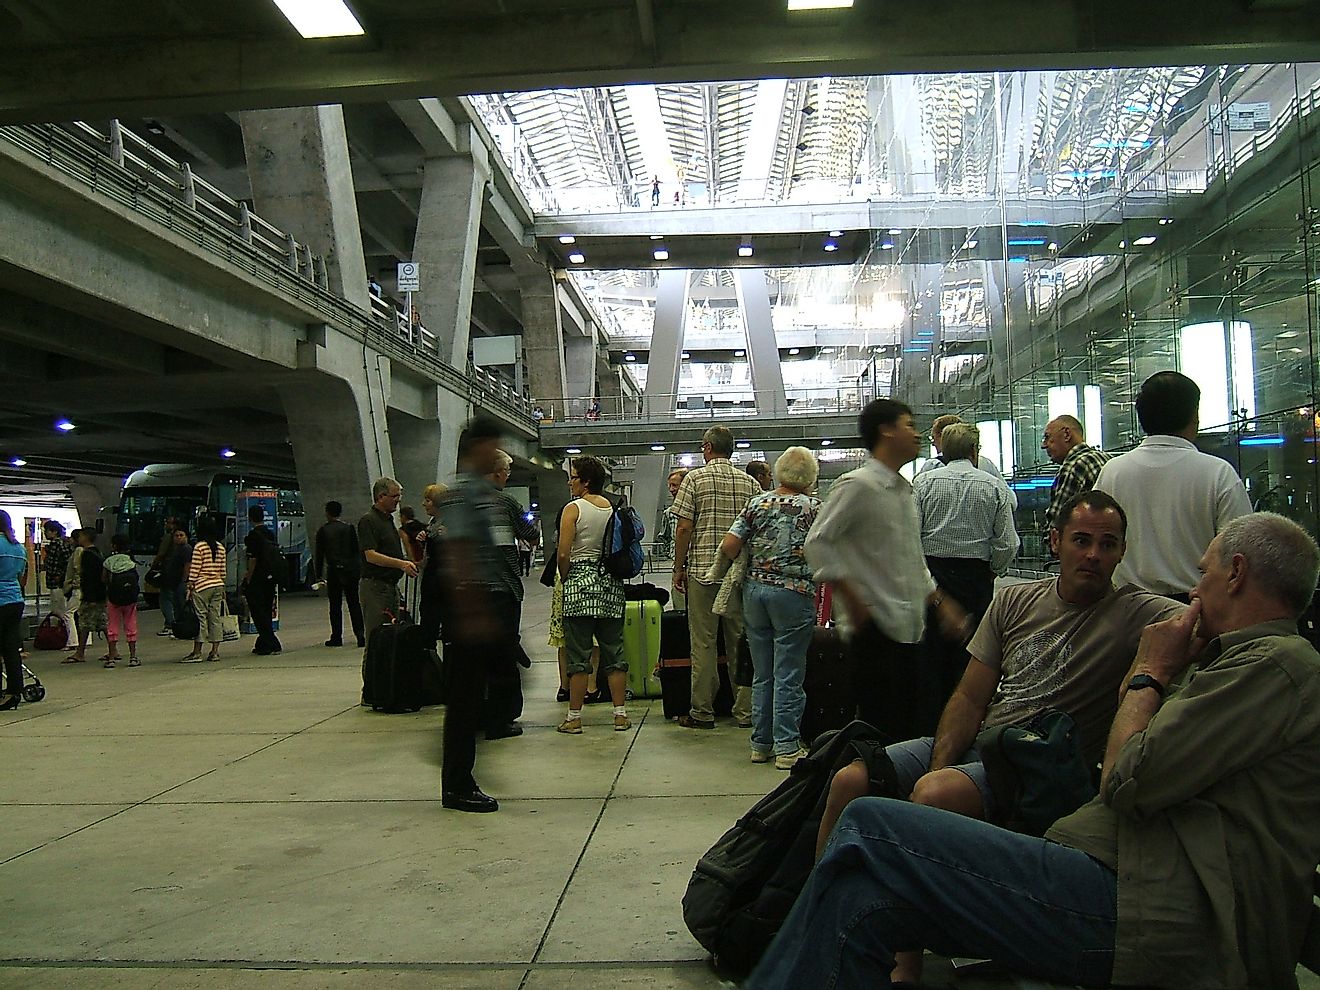 Talking with co-passengers is a great way to spend your time at the airport. Image credit: Shankar s./Flickr.com